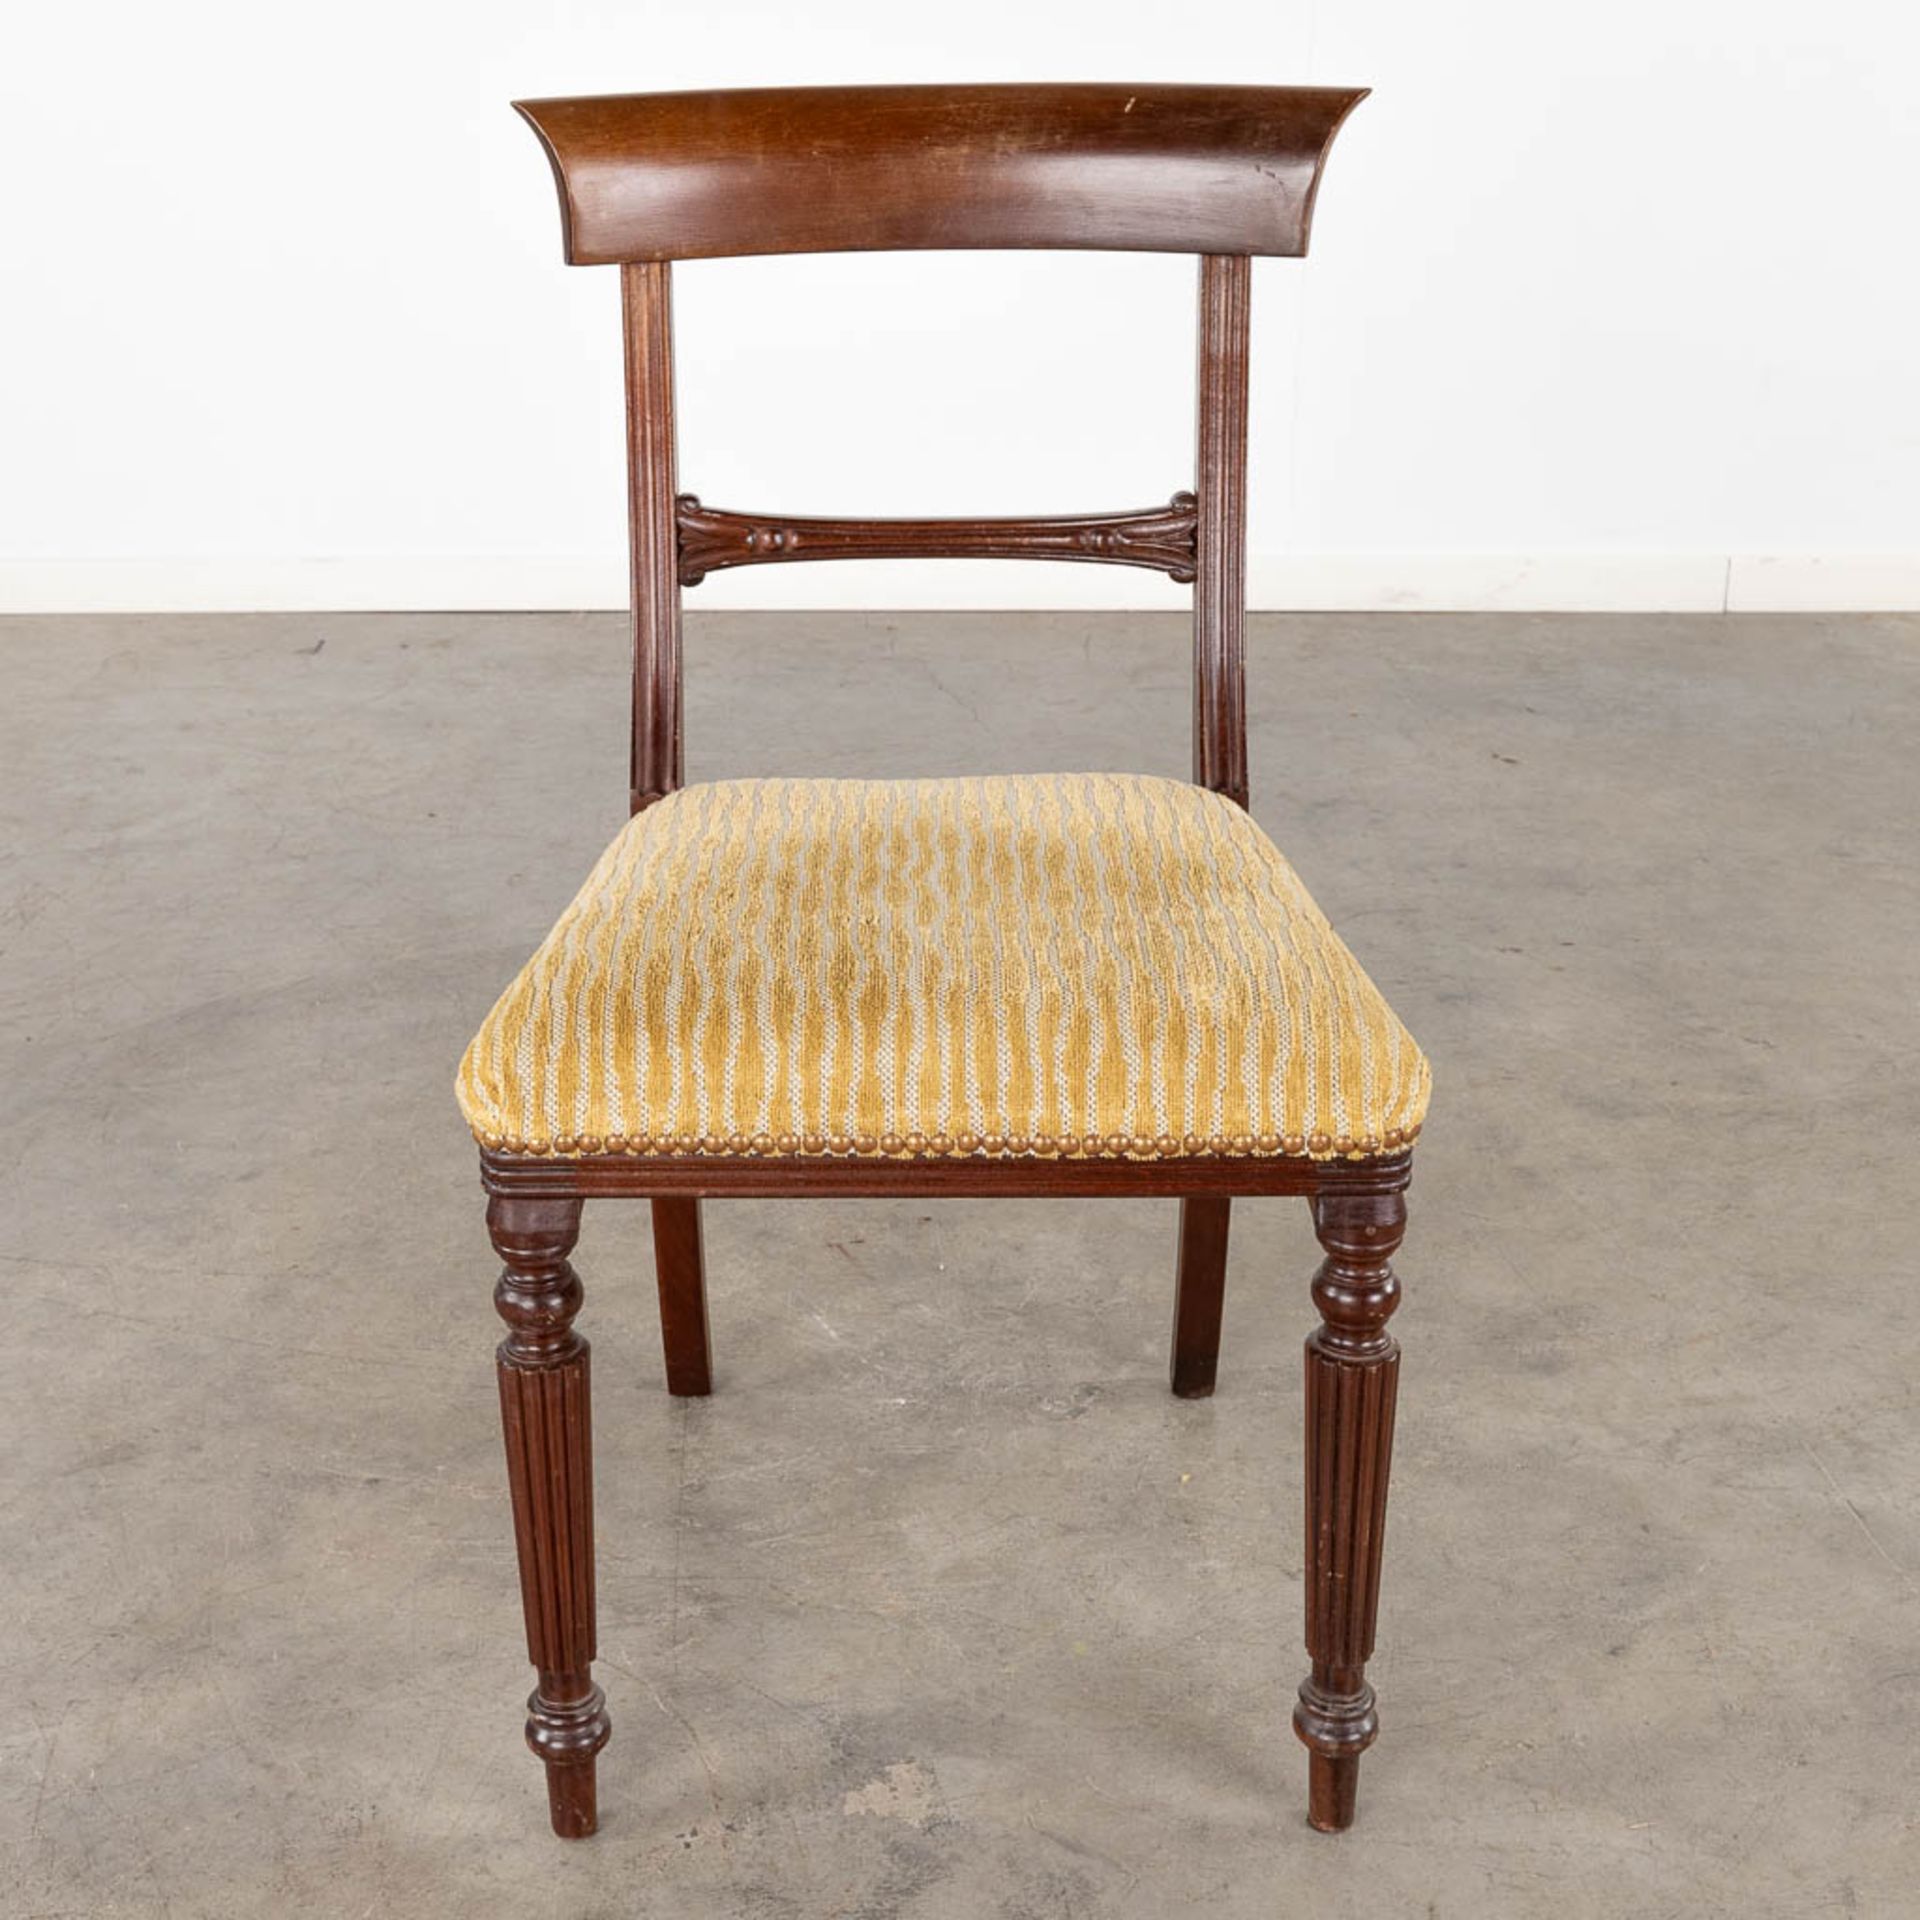 An extendible table, 6 chairs and two armchairs, Mahogany. England. 20th C. (D:144 x W:144 x H:75 cm - Image 18 of 22